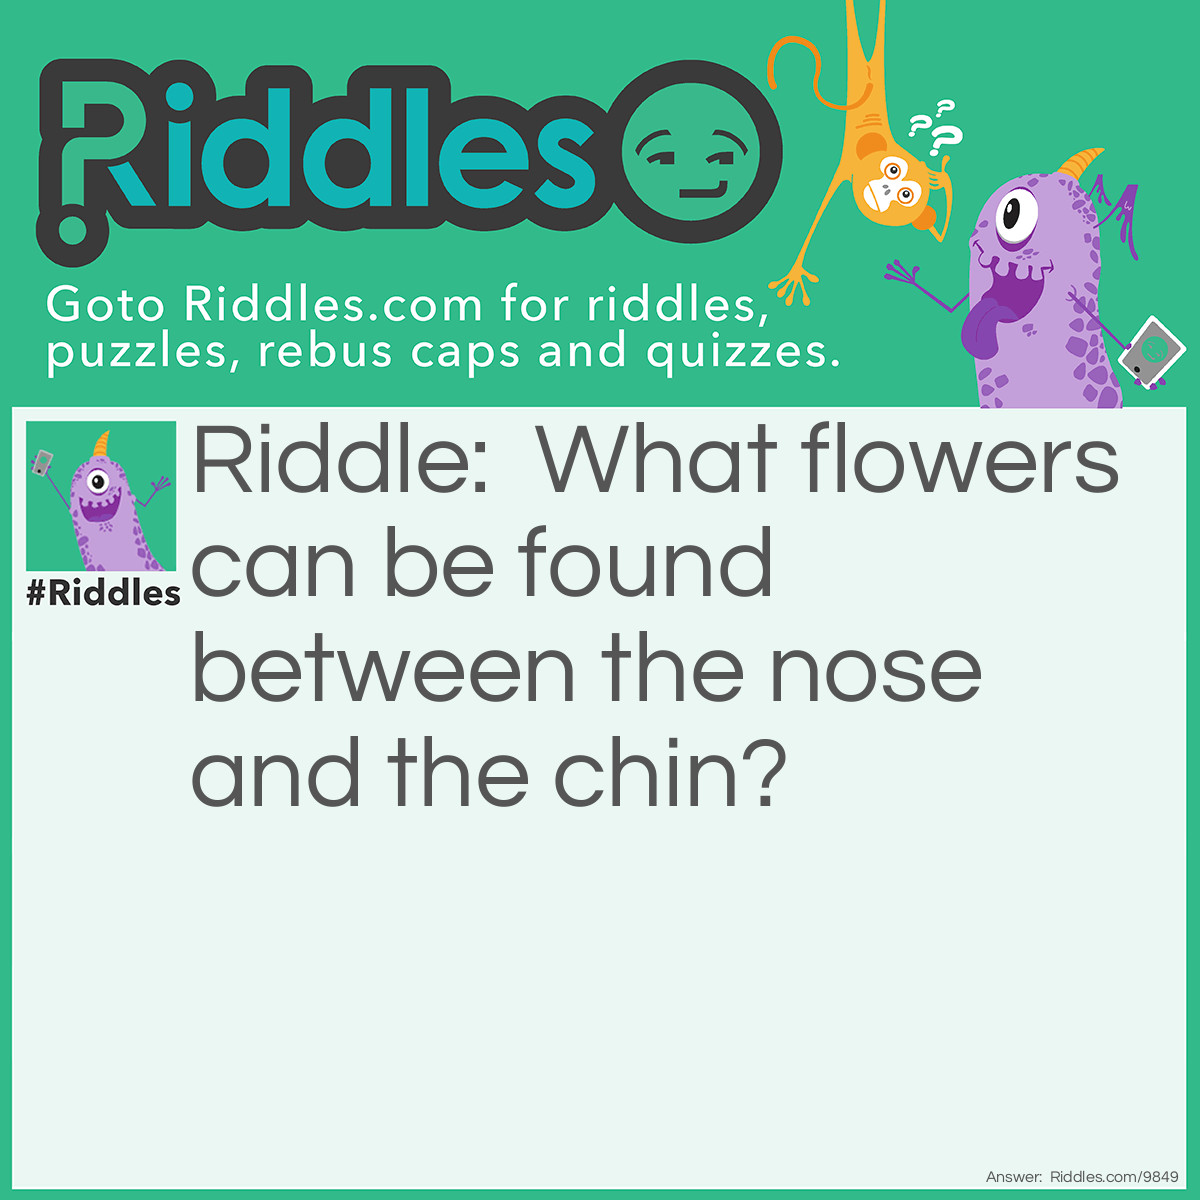 Riddle: What flowers can be found between the nose and the chin? Answer: Tulips – get it? “Two lips.”